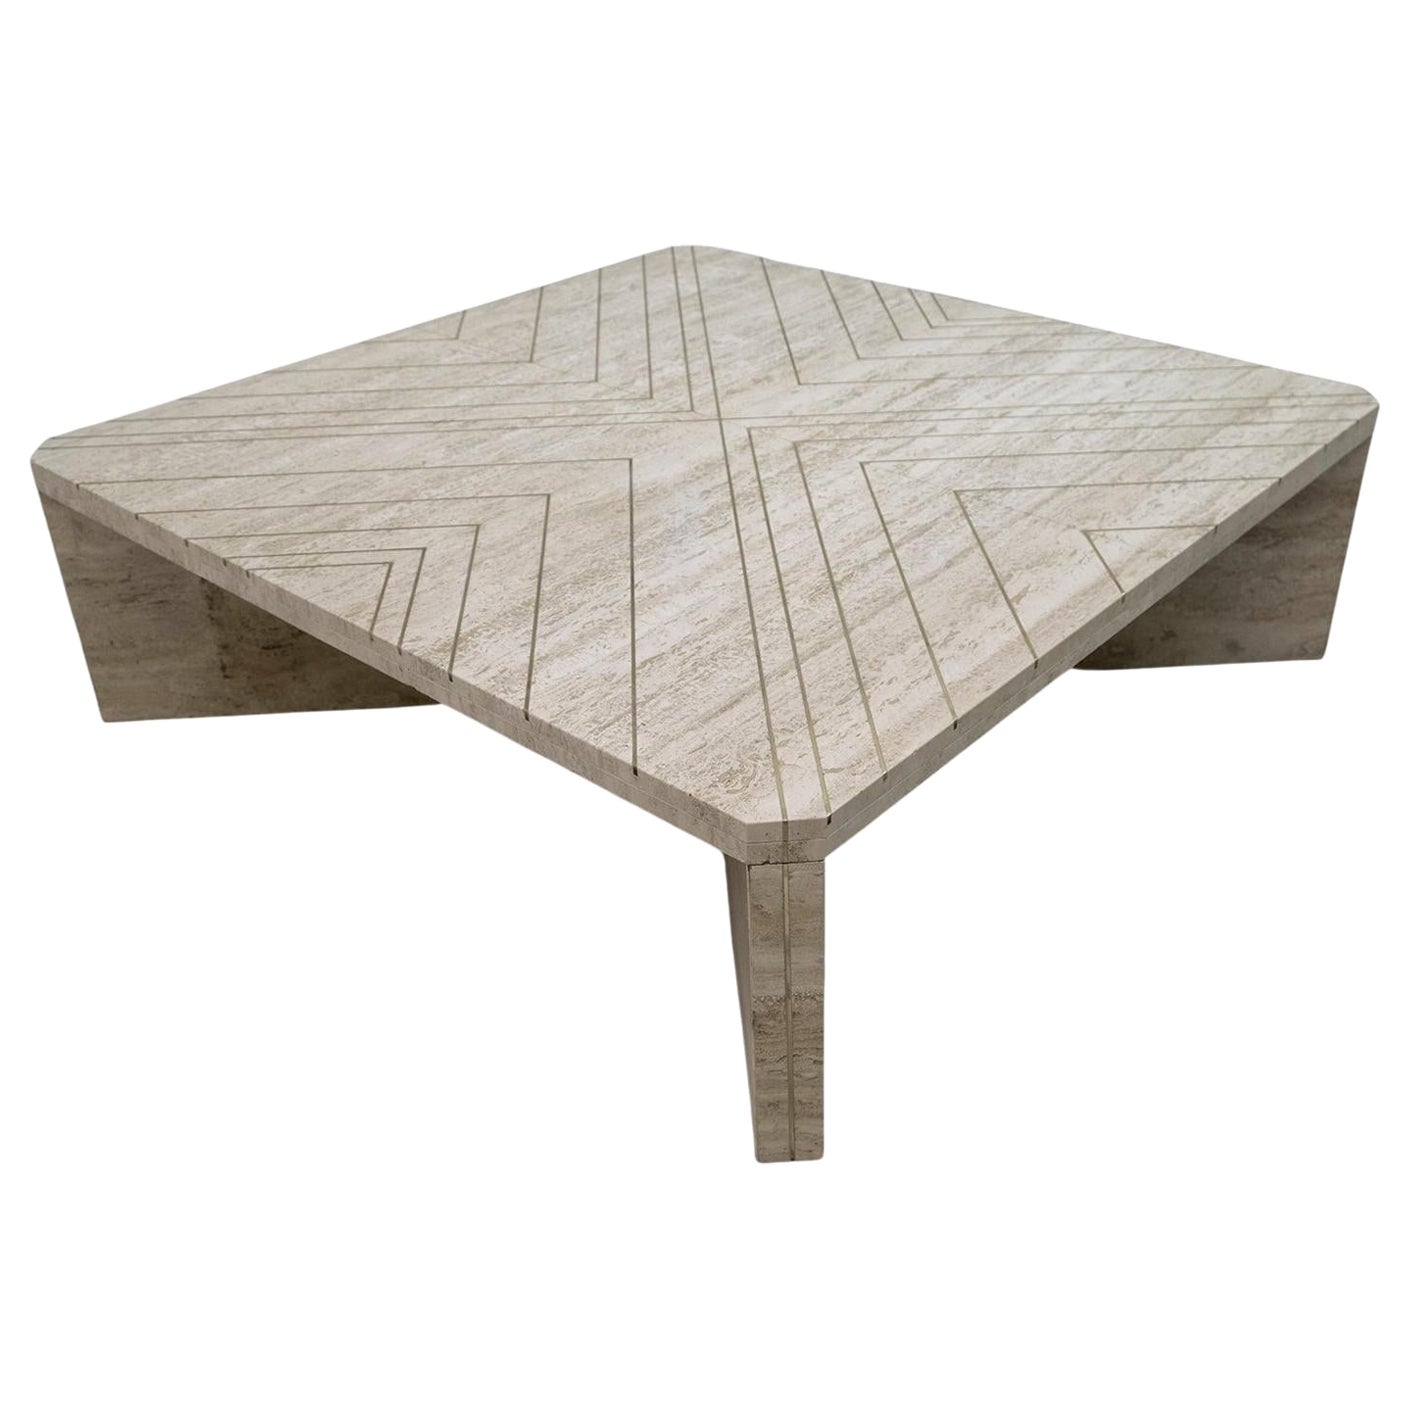 Mid-Century Italian Travertine Coffee Table with Brass Inlays, 70s For Sale